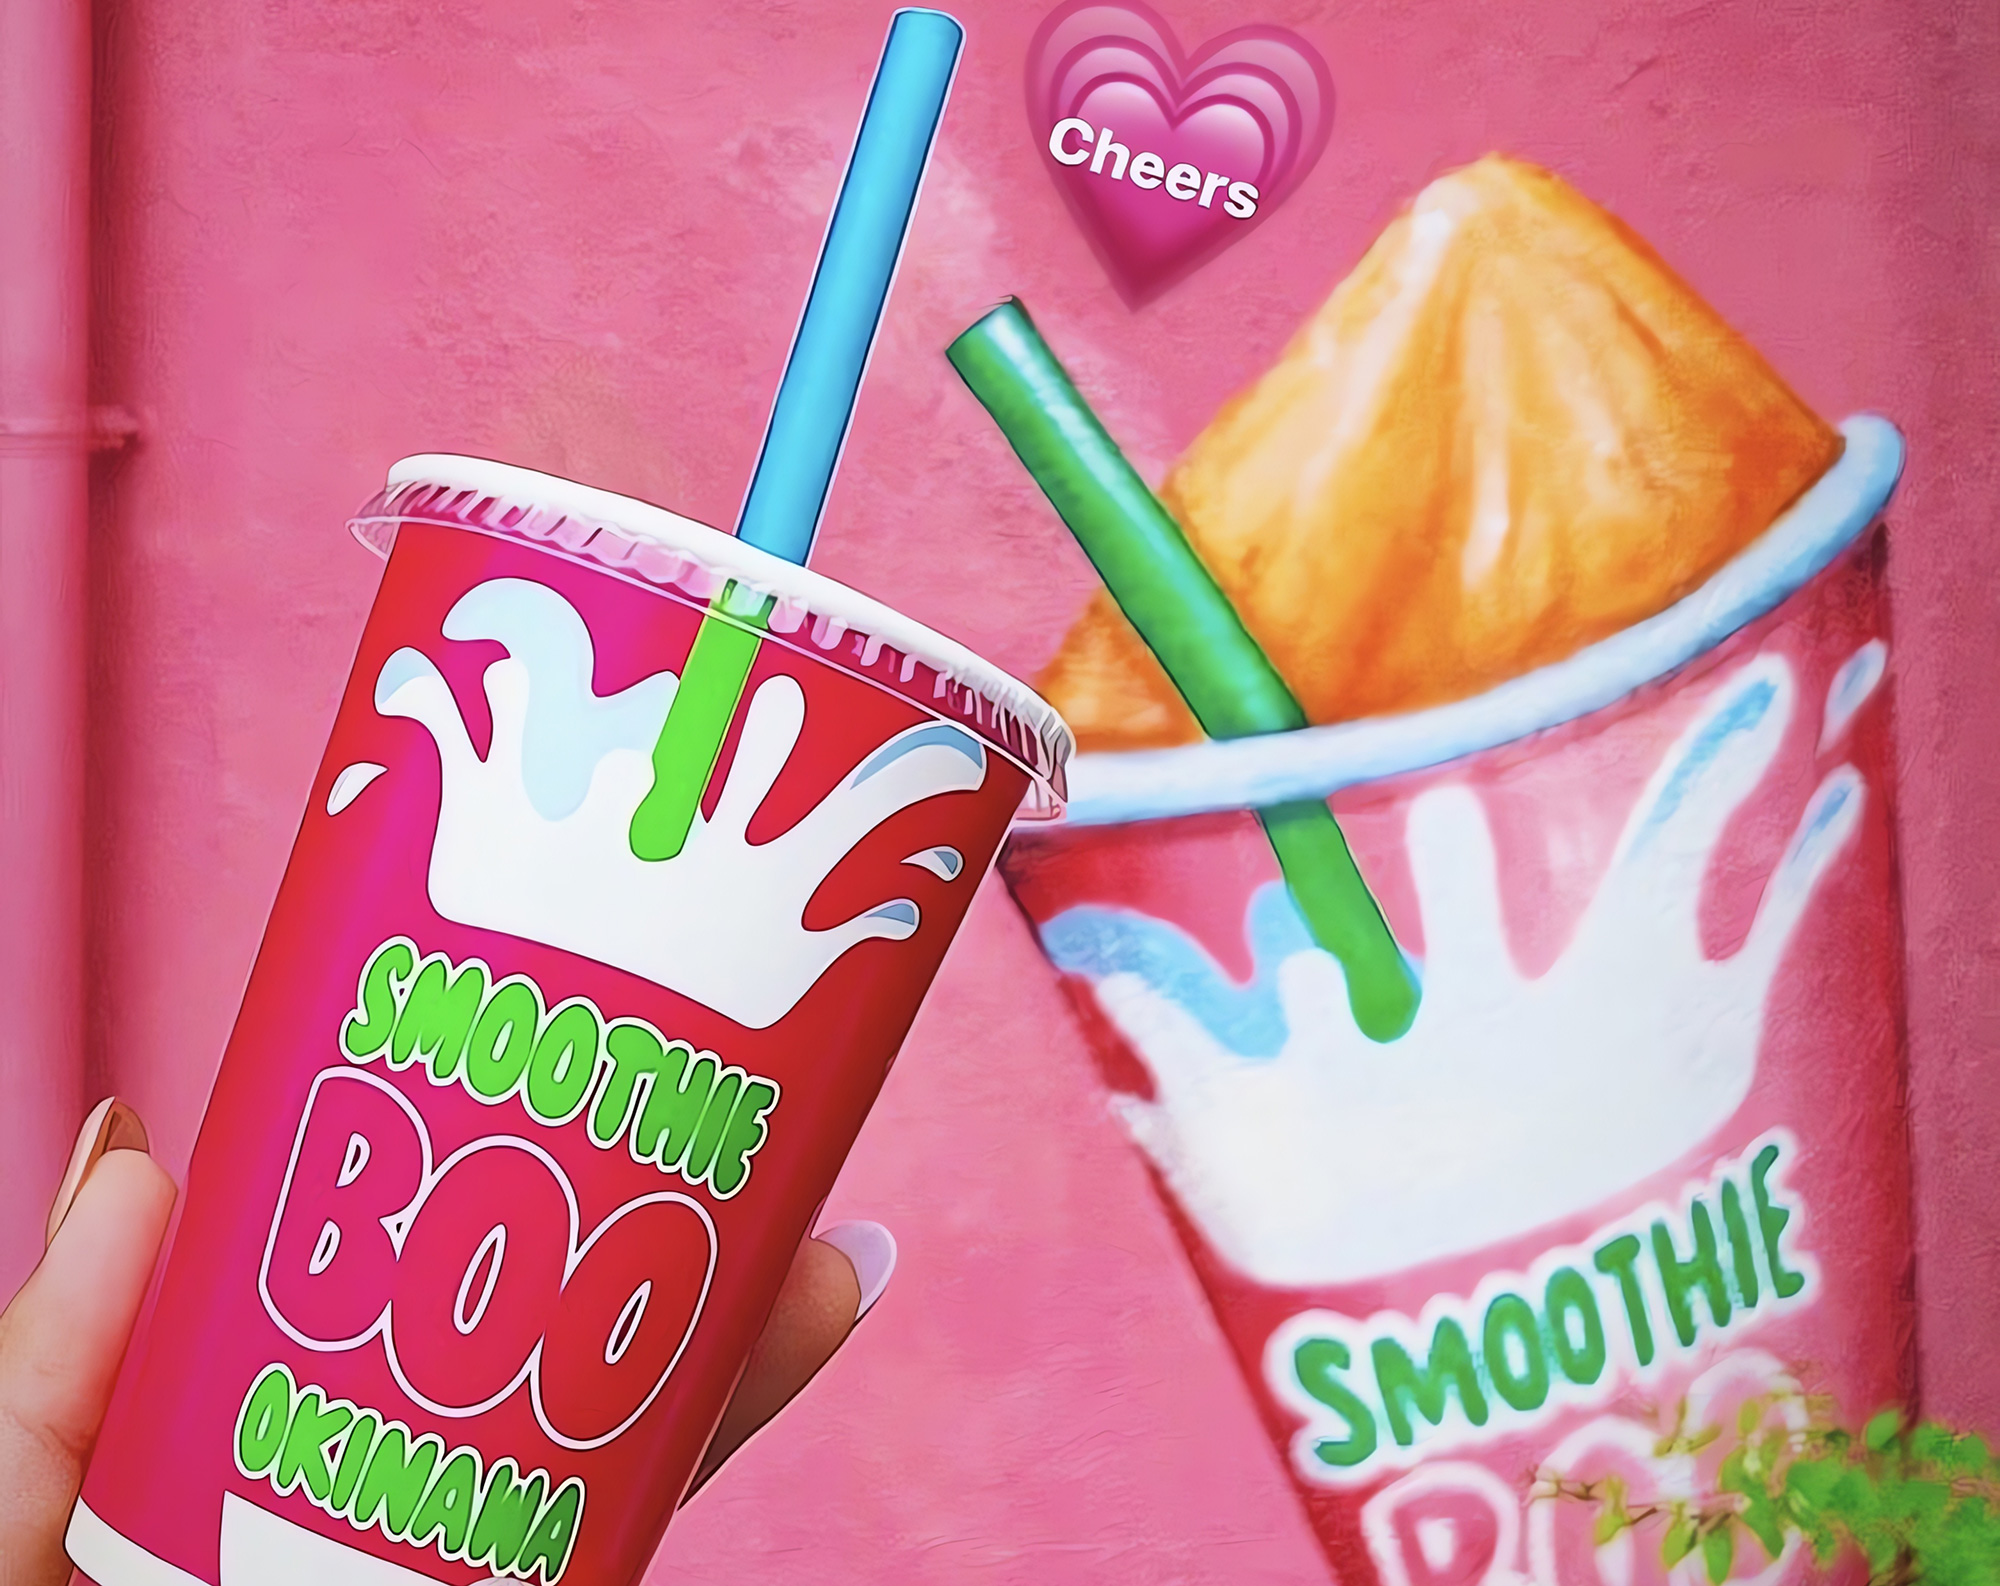 Smoothie BOO（スムージーブー ）